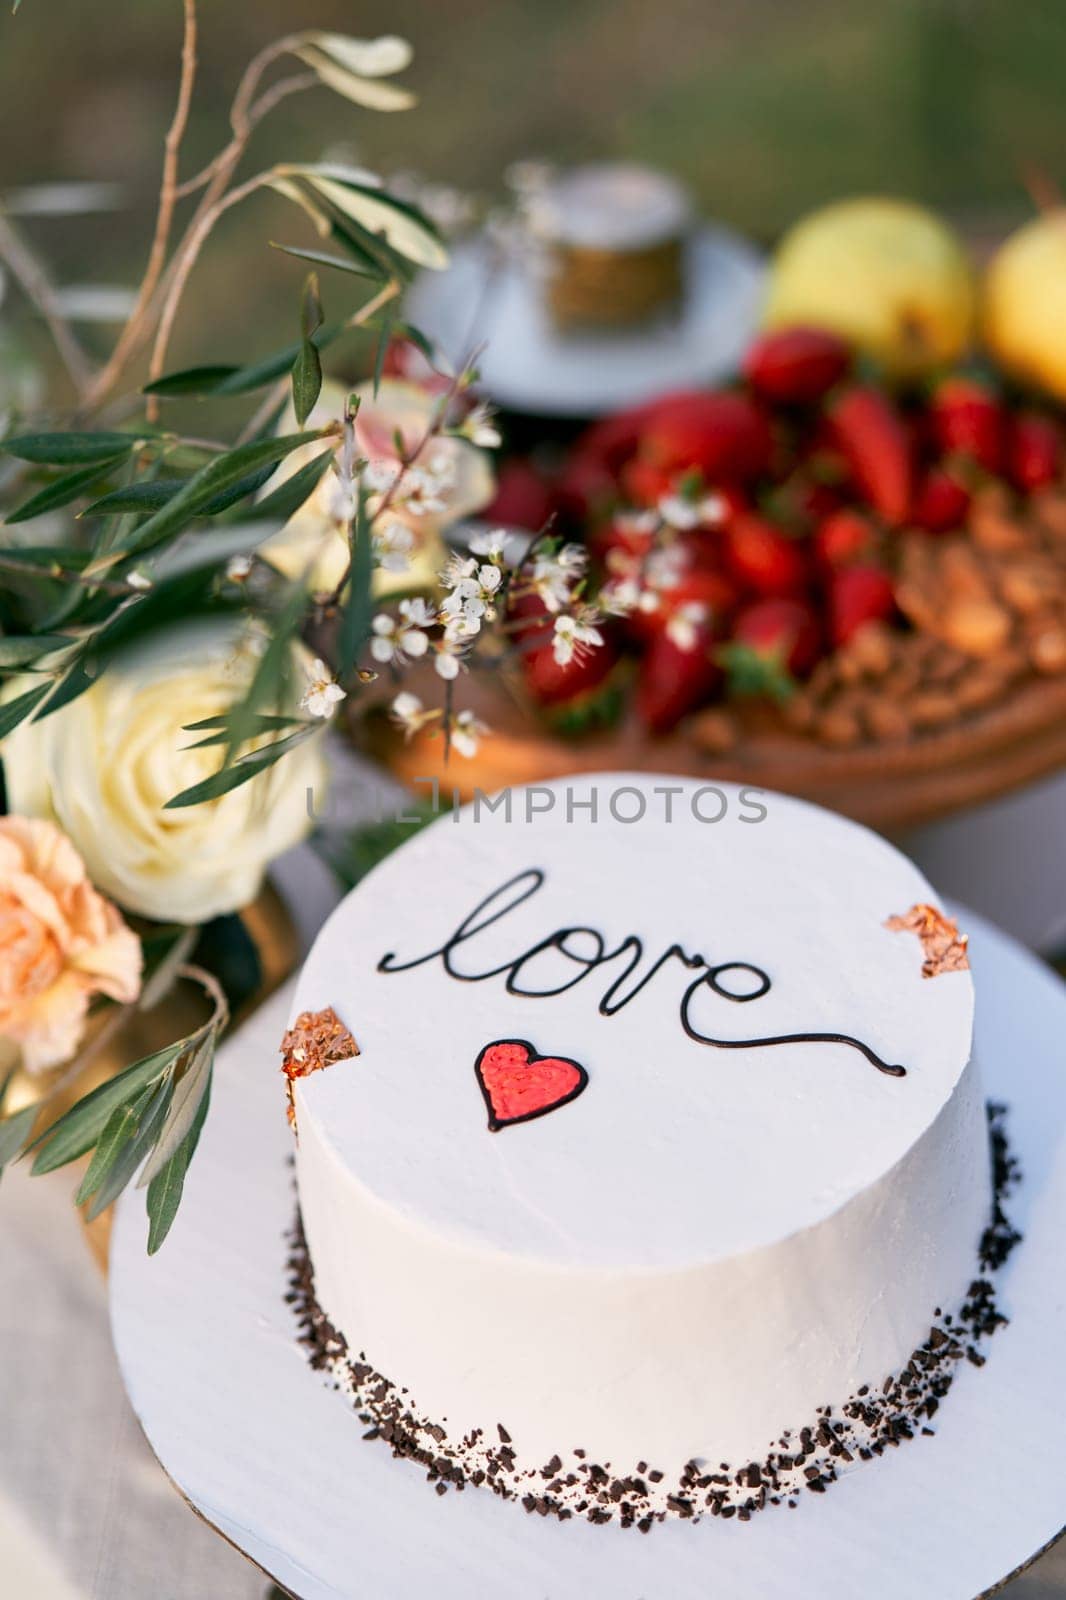 Wedding cake is on the table next to the bouquet of flowers. Caption: Love by Nadtochiy